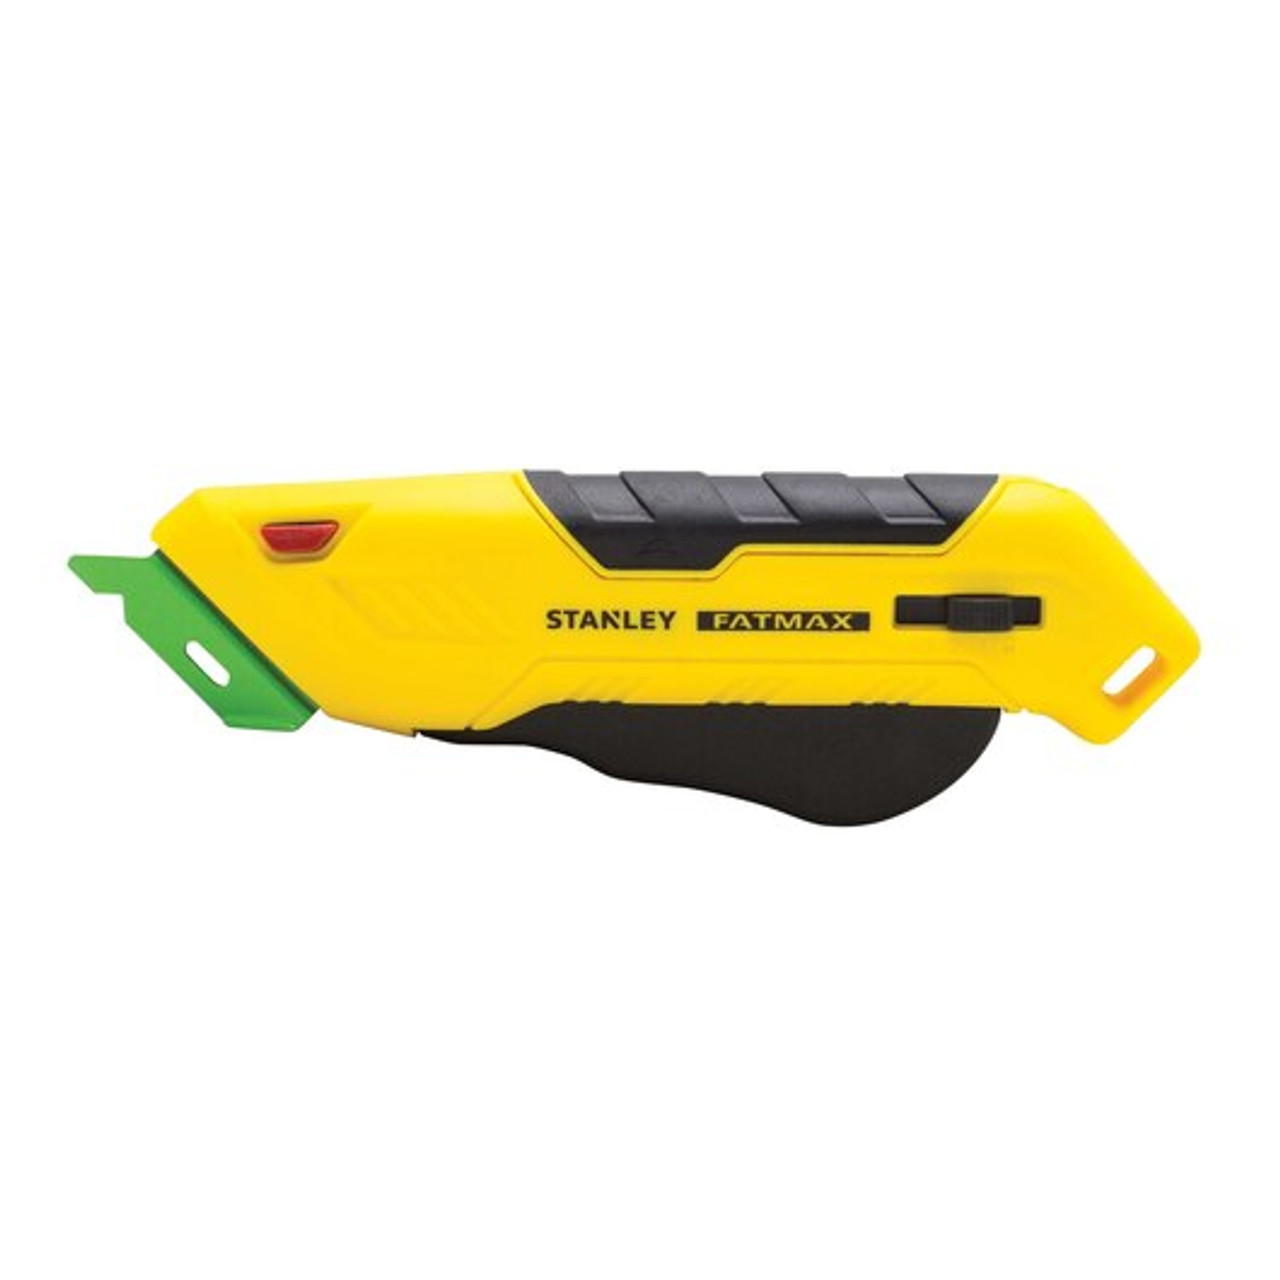 Stanley Fatmax Auto-Retract Tri-Slide Plastic Utility Knife Reviewed